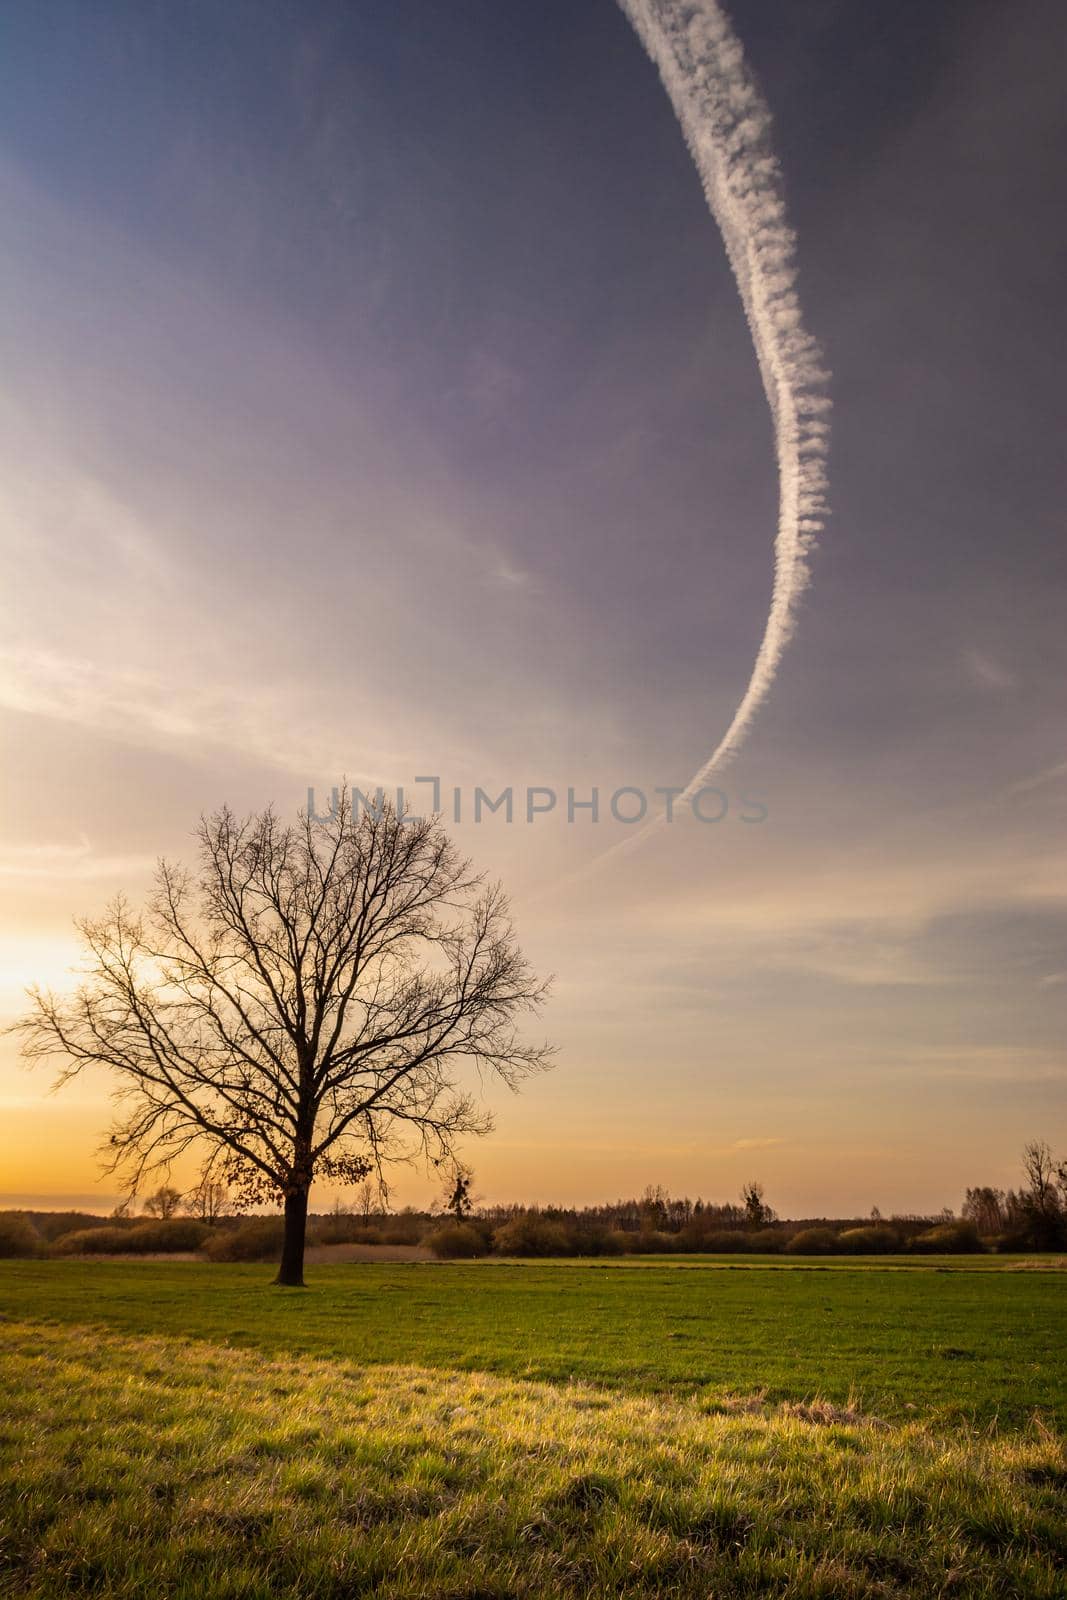 A tree in the meadow and a streak in the sky by darekb22